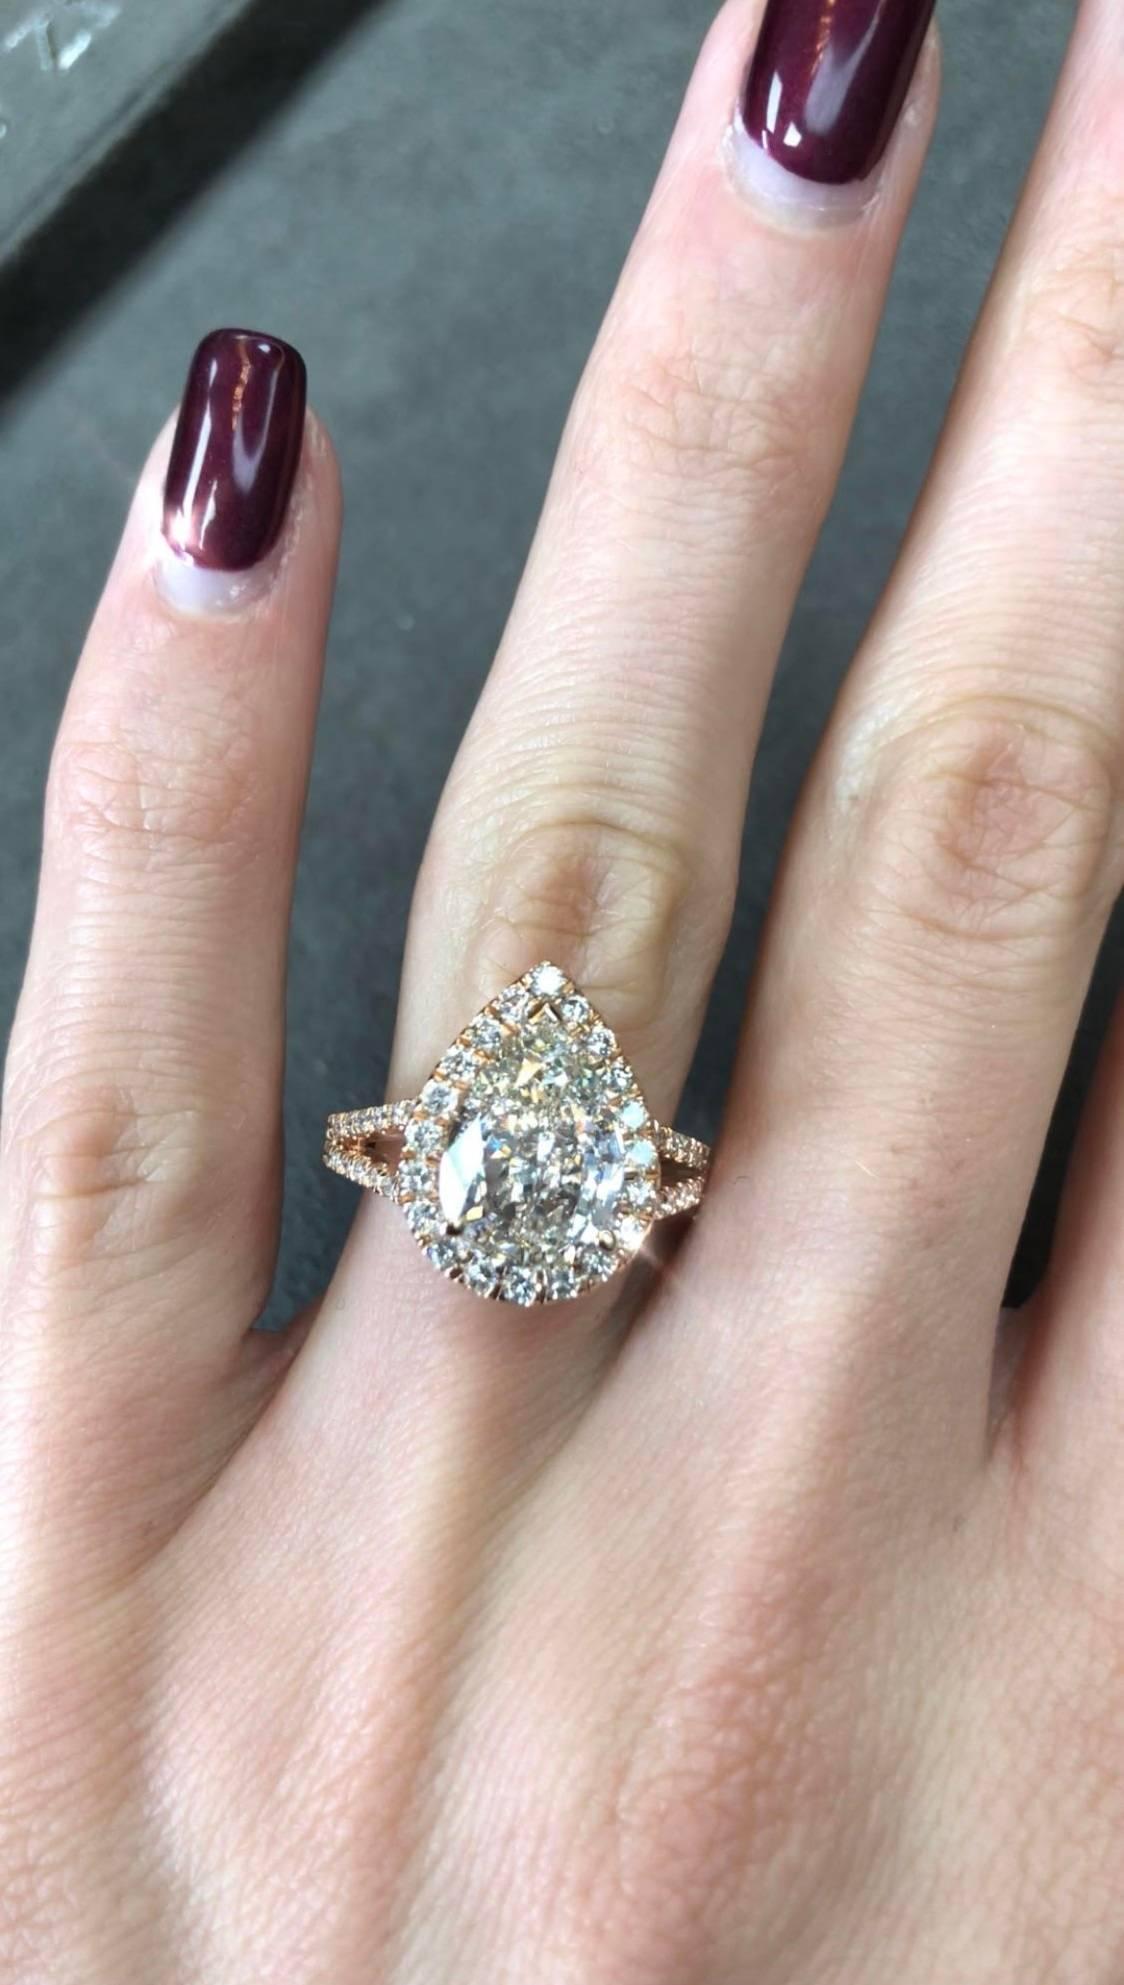 This unique one of a kind pear shaped diamond ring will take your breath away! This mesmerizing 14k rose gold ring features a 3.01ct pear shaped diamond in the center. It is GIA certified at J-VS2, near colorless and perfectly clear, even under 10X